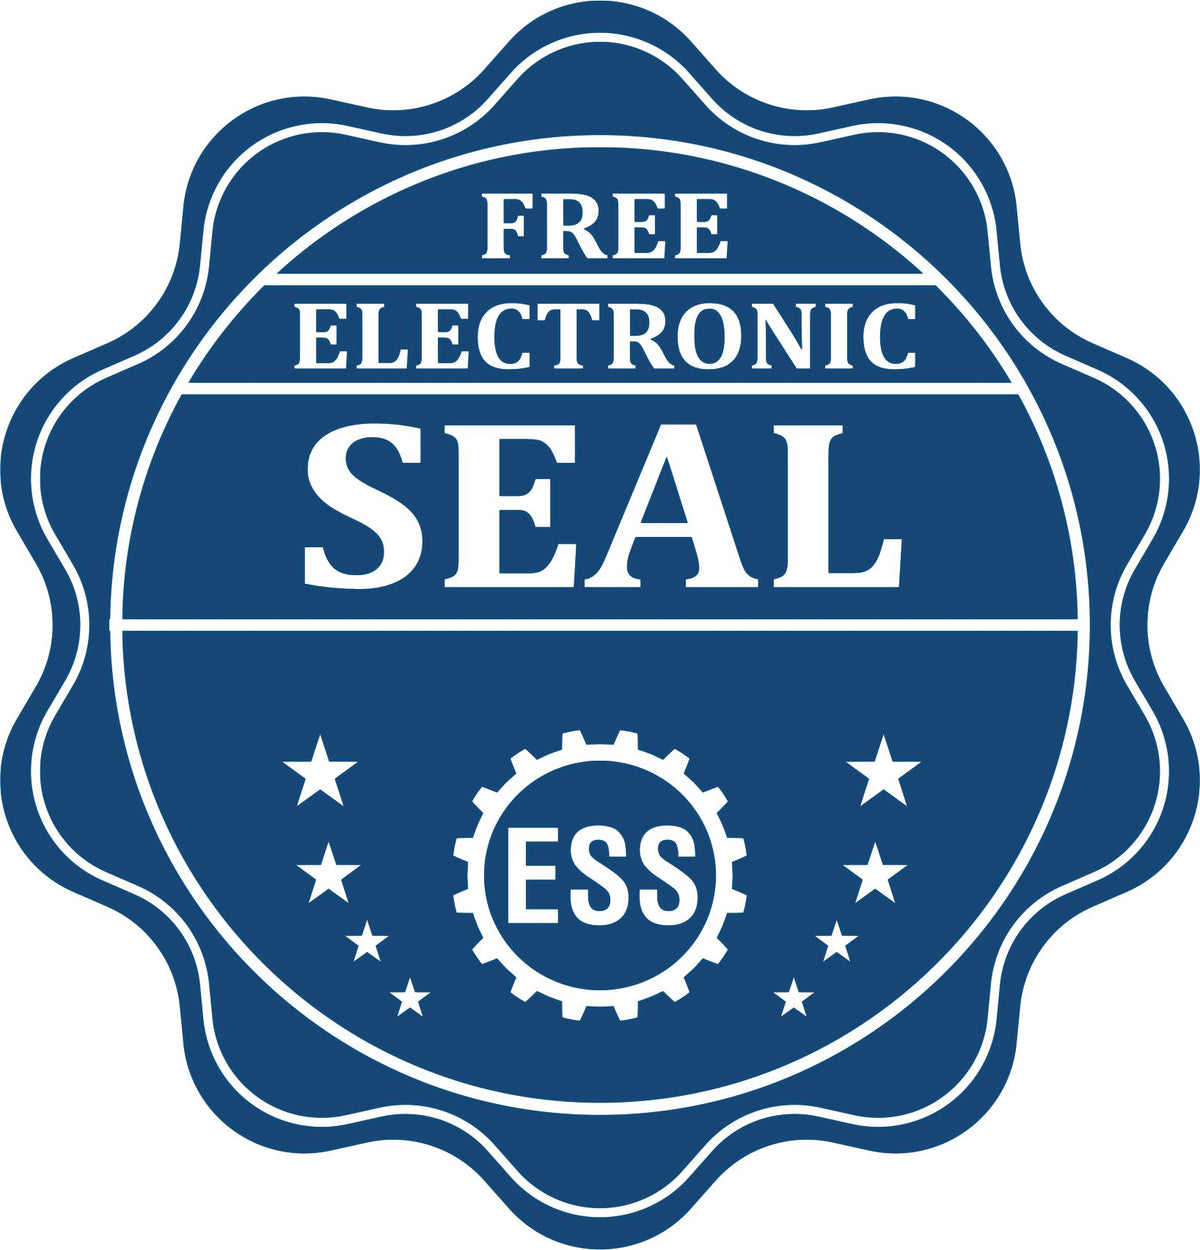 A badge showing a free electronic seal for the Hybrid Maine Engineer Seal with stars and the ESS gear on the emblem.